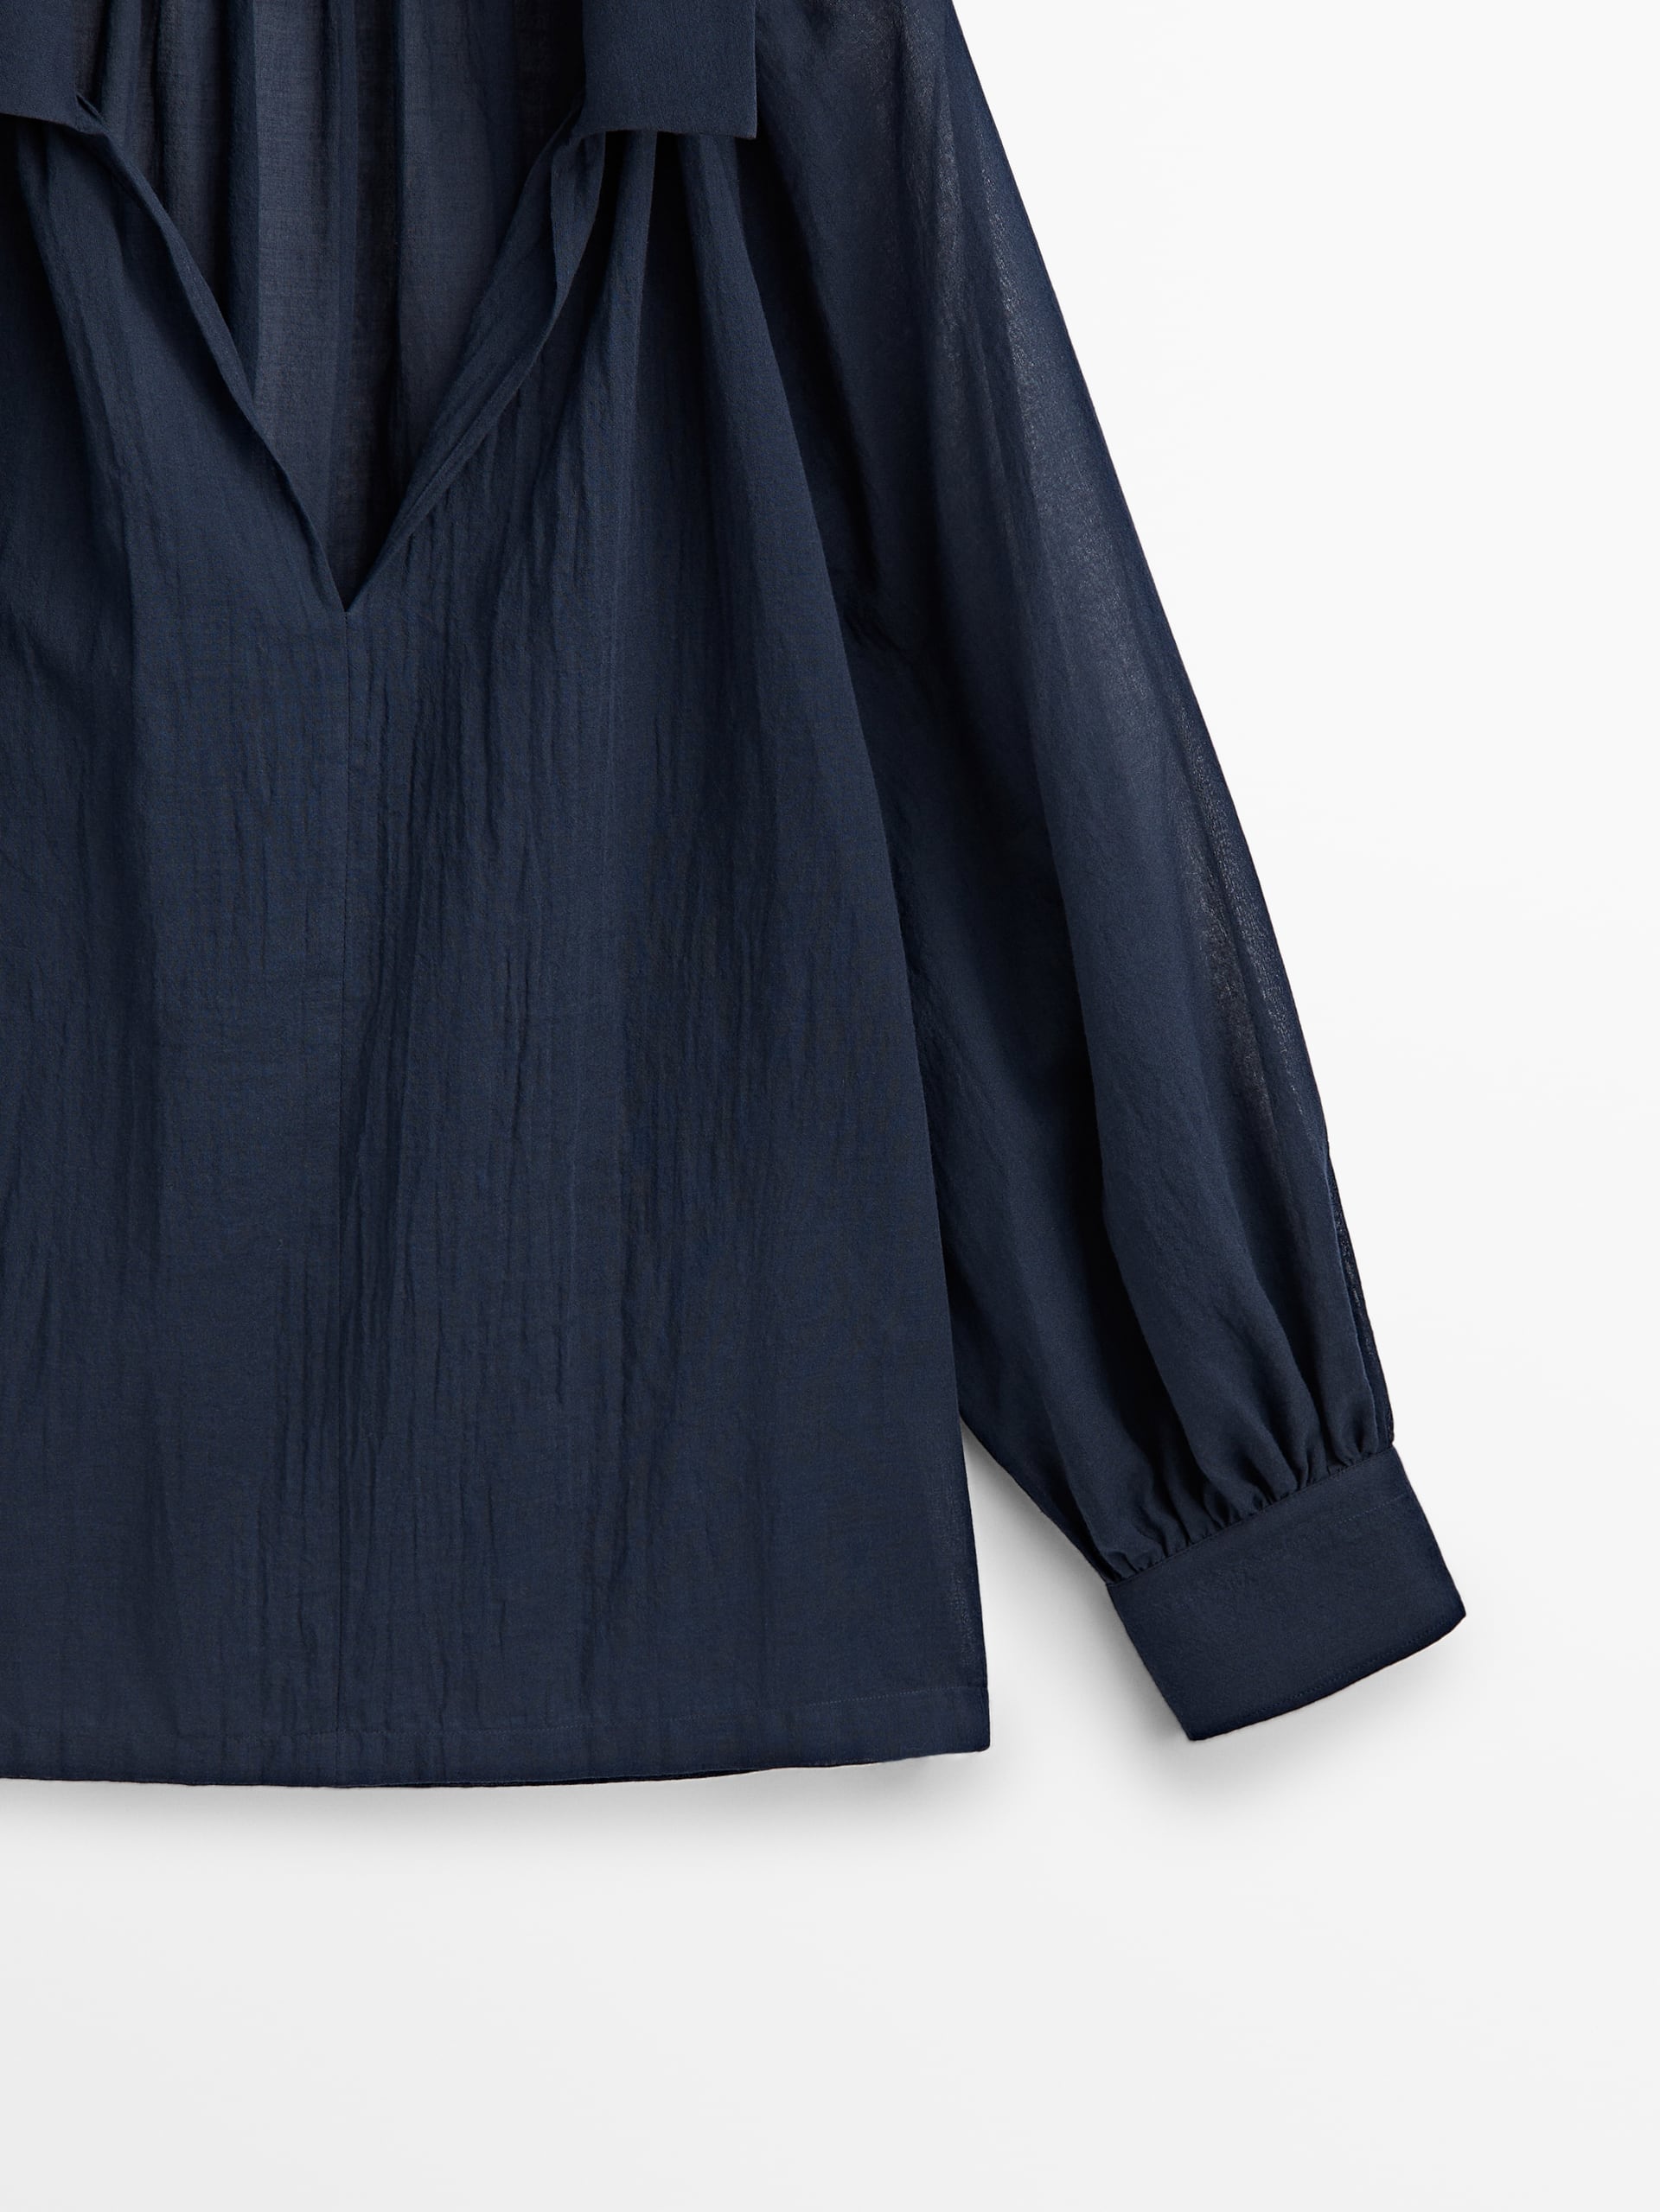 Cotton voile blouse with gathered details - Navy blue | ZARA United States